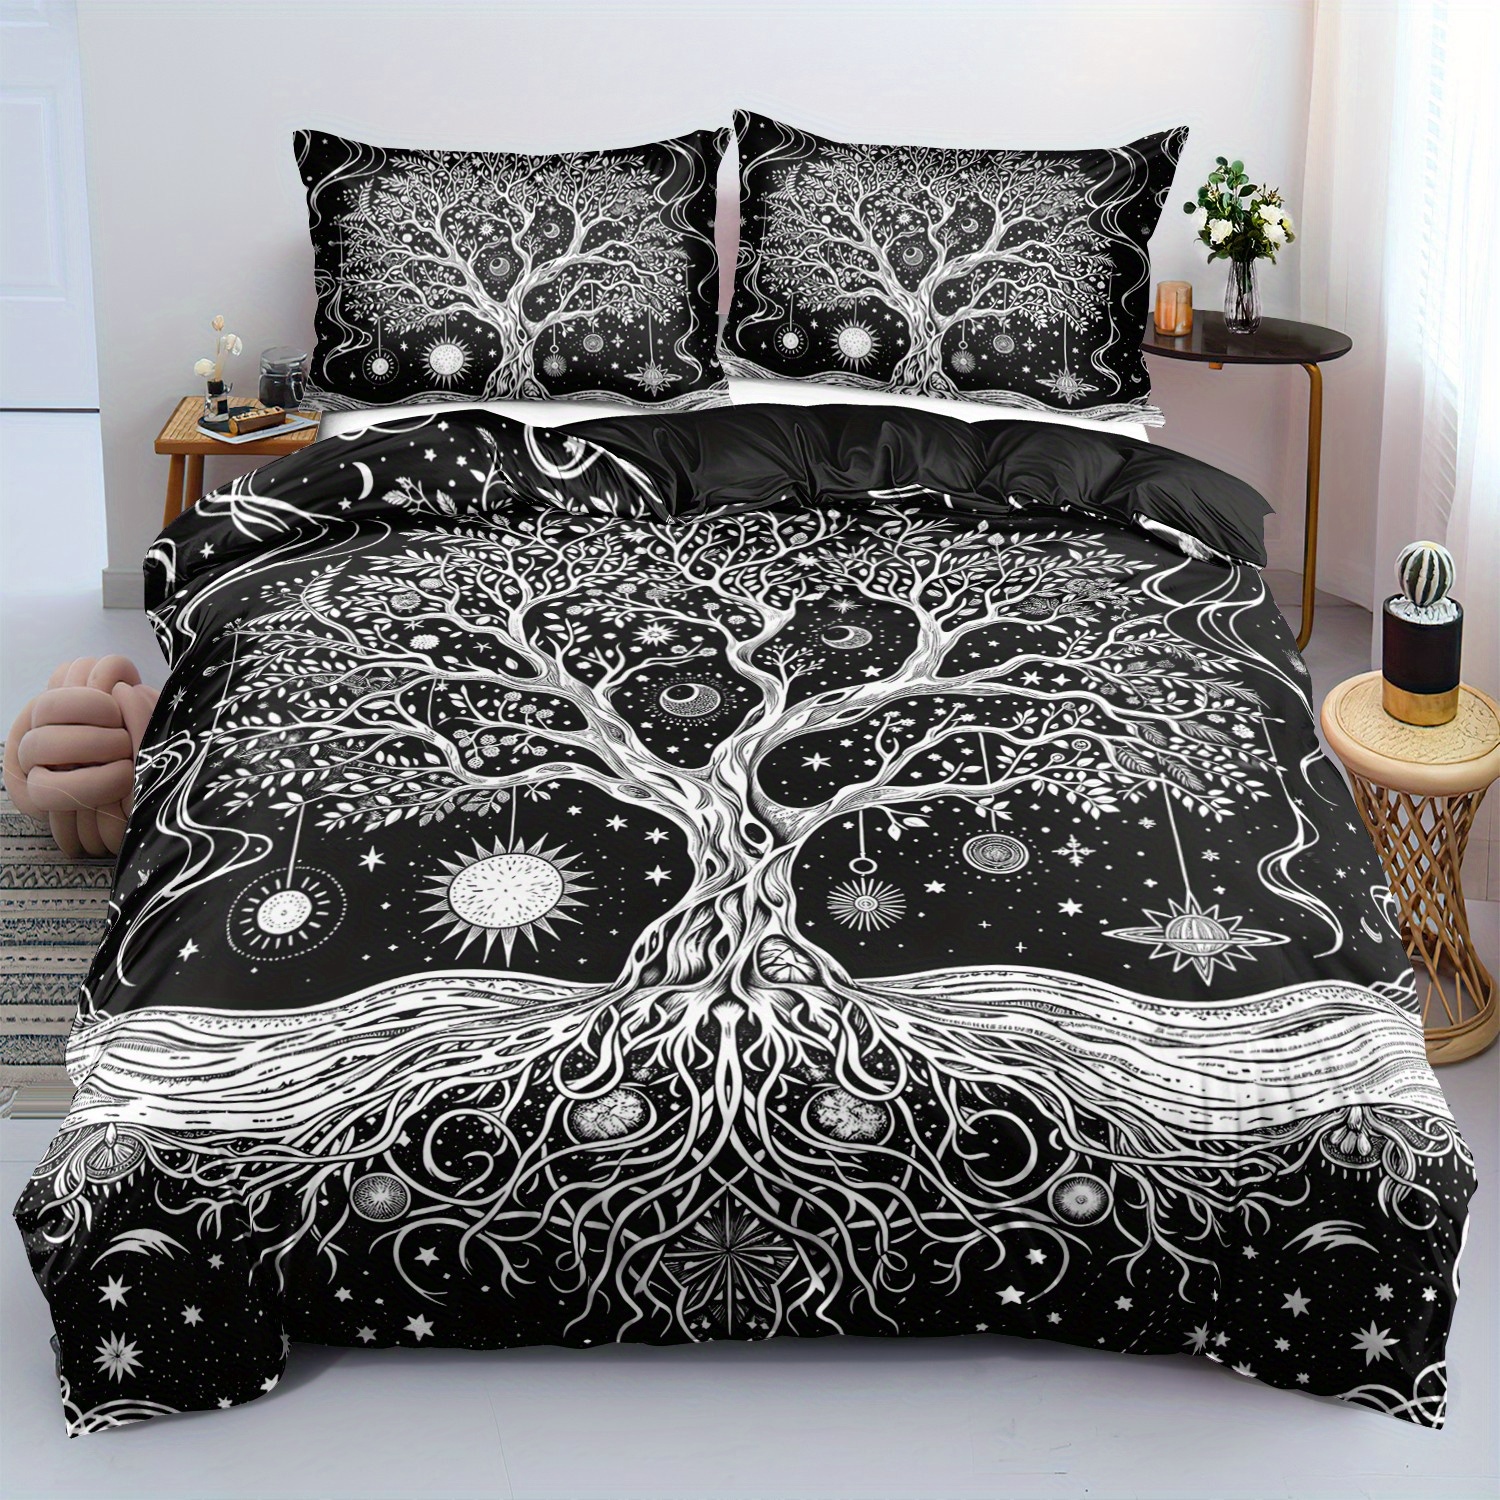 

Life Tree Bedding Set: 1 Duvet Cover (68*86in/173*218cm) + 2 Pillow Cases (20*30in/50*75cm) - Comforter, Flat Sheet & Fitted Sheet Not Included